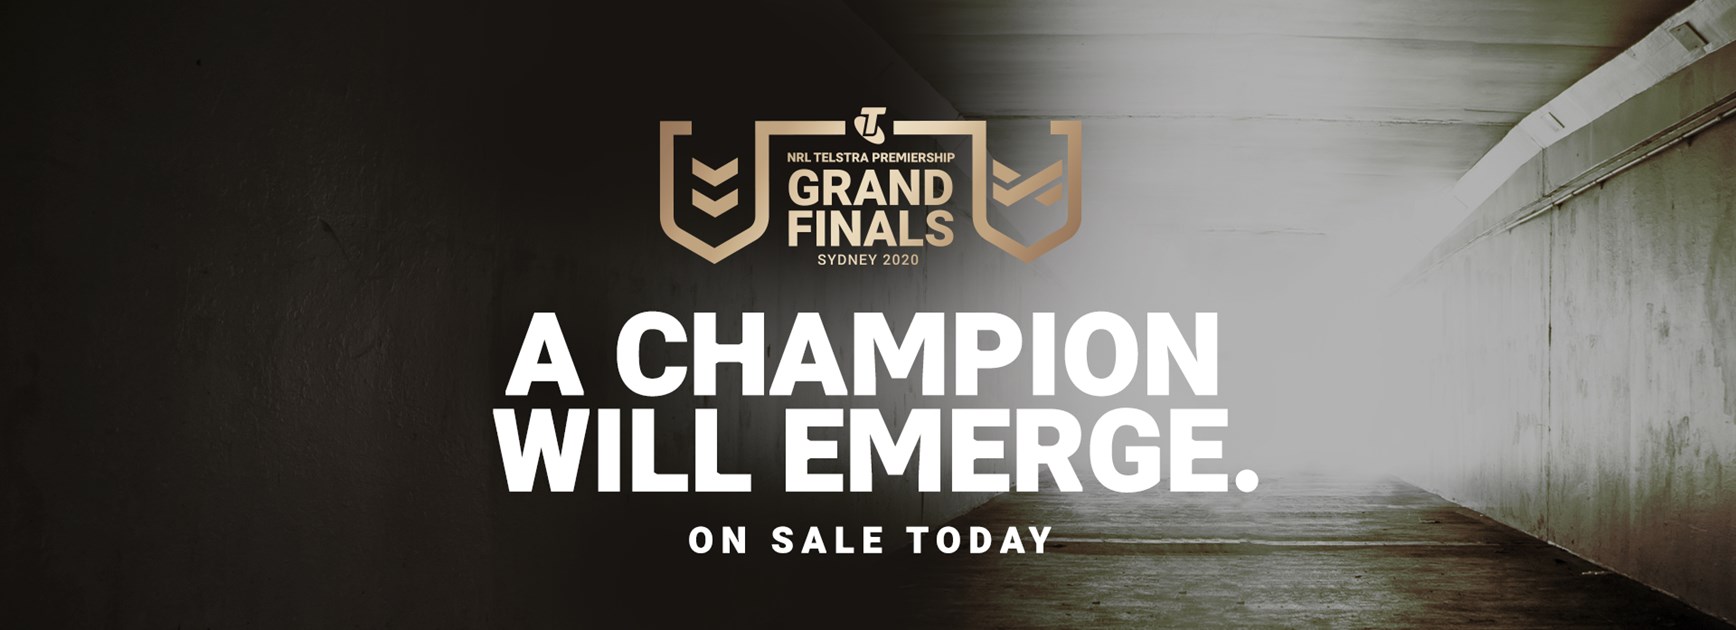 Getting Your 2020 Grand Final Tickets